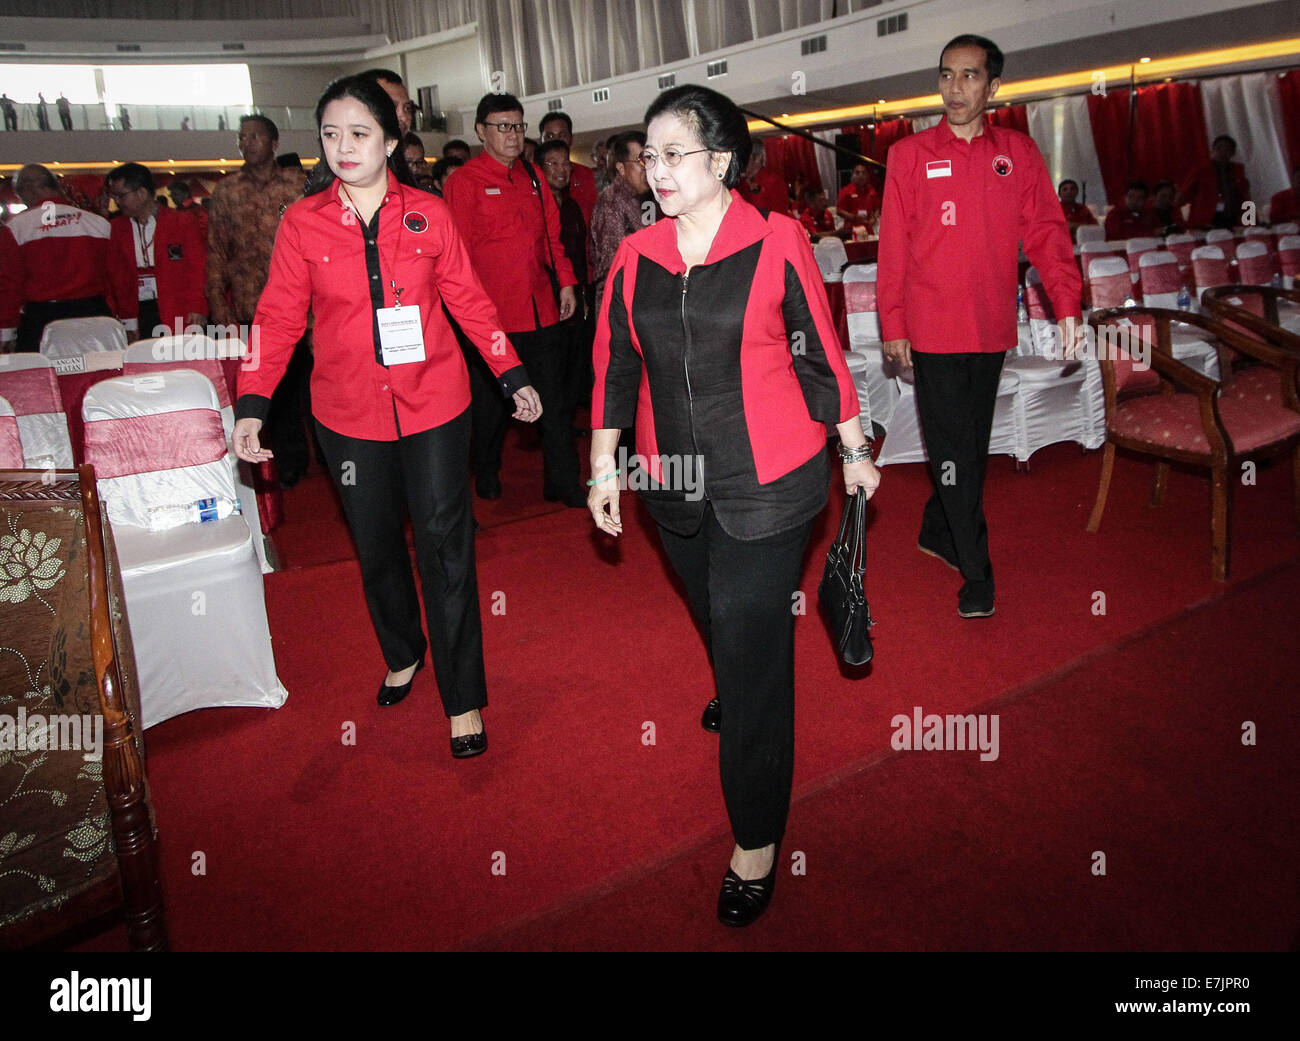 Semarang, Indonesia. 19th September, 2014. From Right, Indonesian president-elect Joko Widodo, Former president and chairperson of Indonesian Democratic Party of Struggle (PDI-P) Megawati Sukarnoputri and chairman of PDI-P party who also the daughter of Megawati, Puan Maharani attend the 4th national working meeting of PDI-P at Marina Convention Hall in Semarang, Central Java, Indonesia. The national meeting attended by 1,590 party cadres from all over Indonesia and take place from 19-21 September 2014. Credit:  PACIFIC PRESS/Alamy Live News Stock Photo